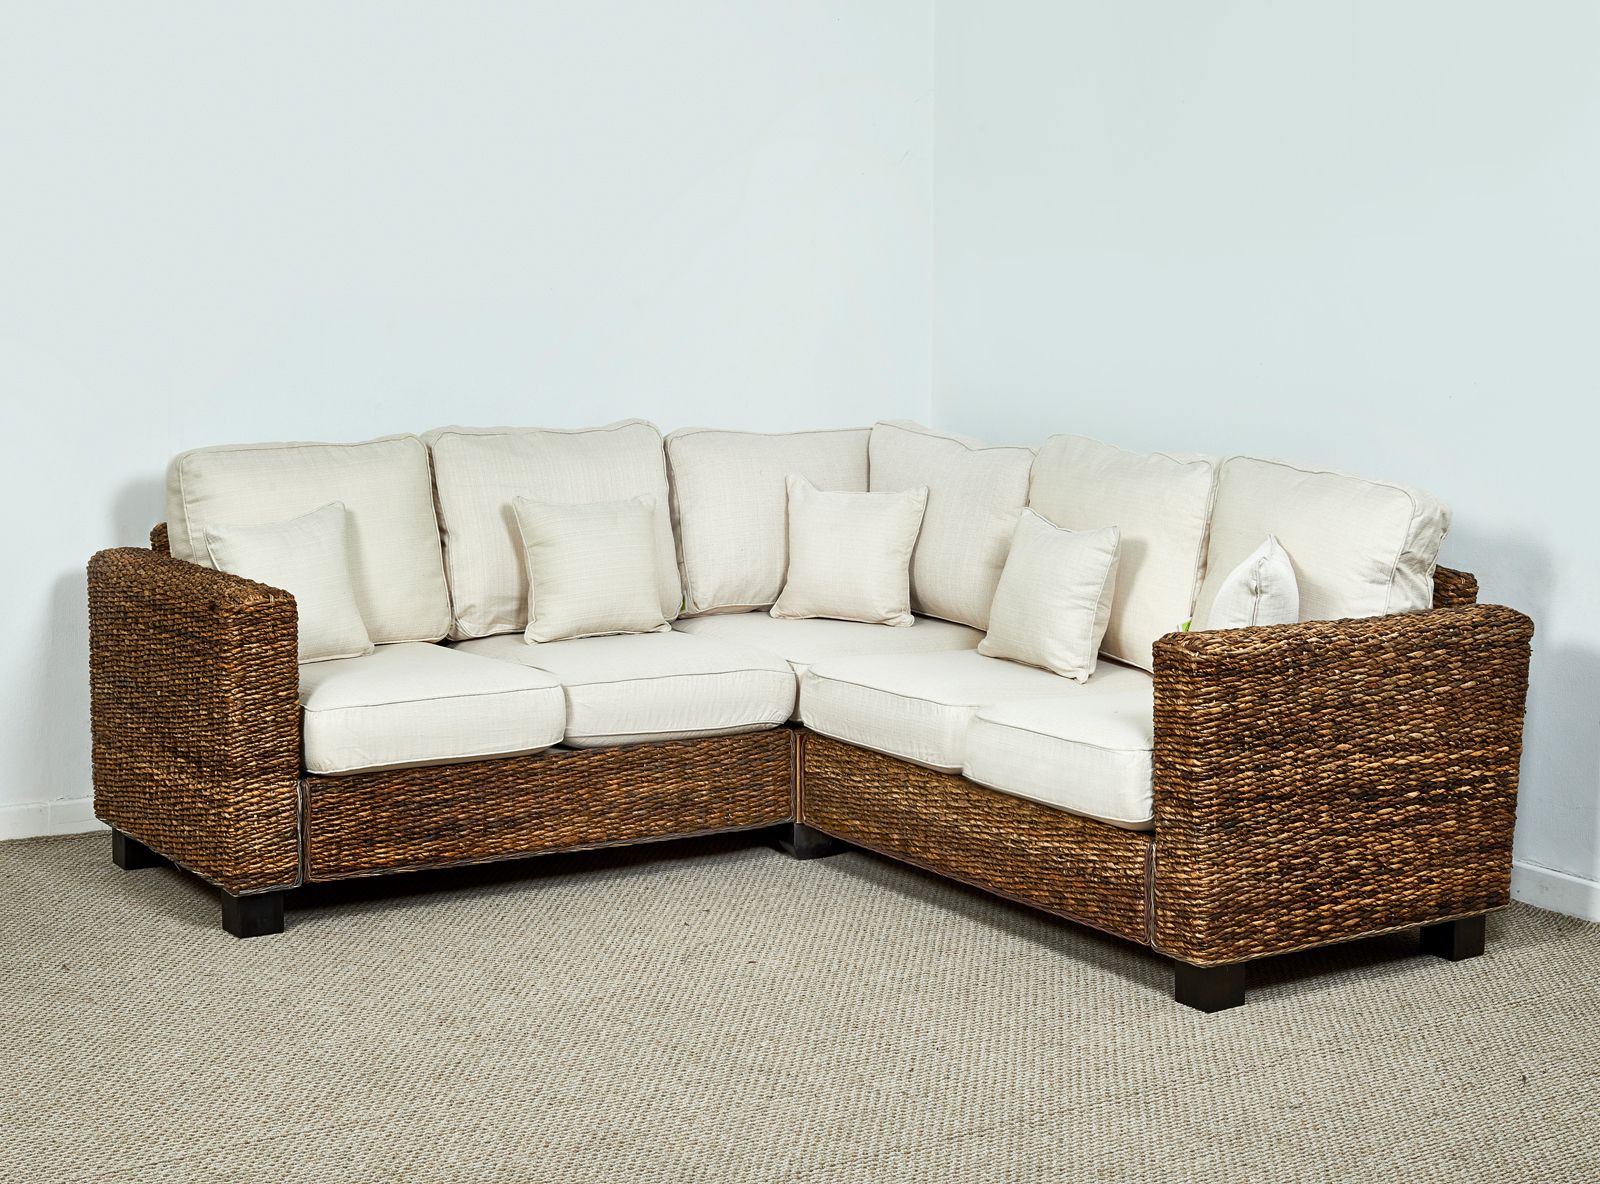 Natural Rattan Conservatory Corner Sofa In Oatmeal – Kensington Abaca Throughout Natural Woven Banana Console Tables (View 6 of 20)